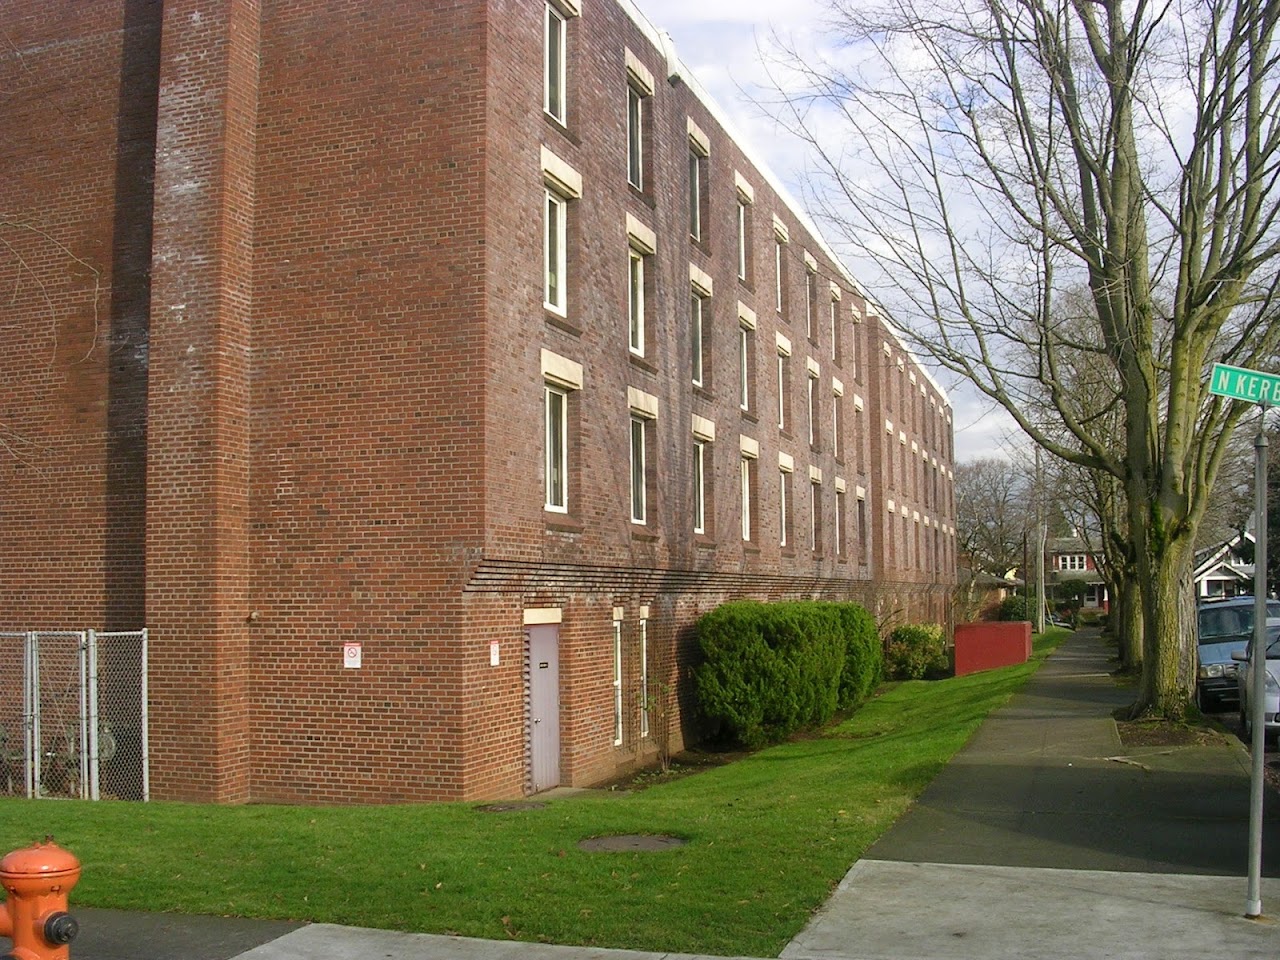 Photo of CASCADIAN TERRACE. Affordable housing located at 5700 N KERBY AVE PORTLAND, OR 97217